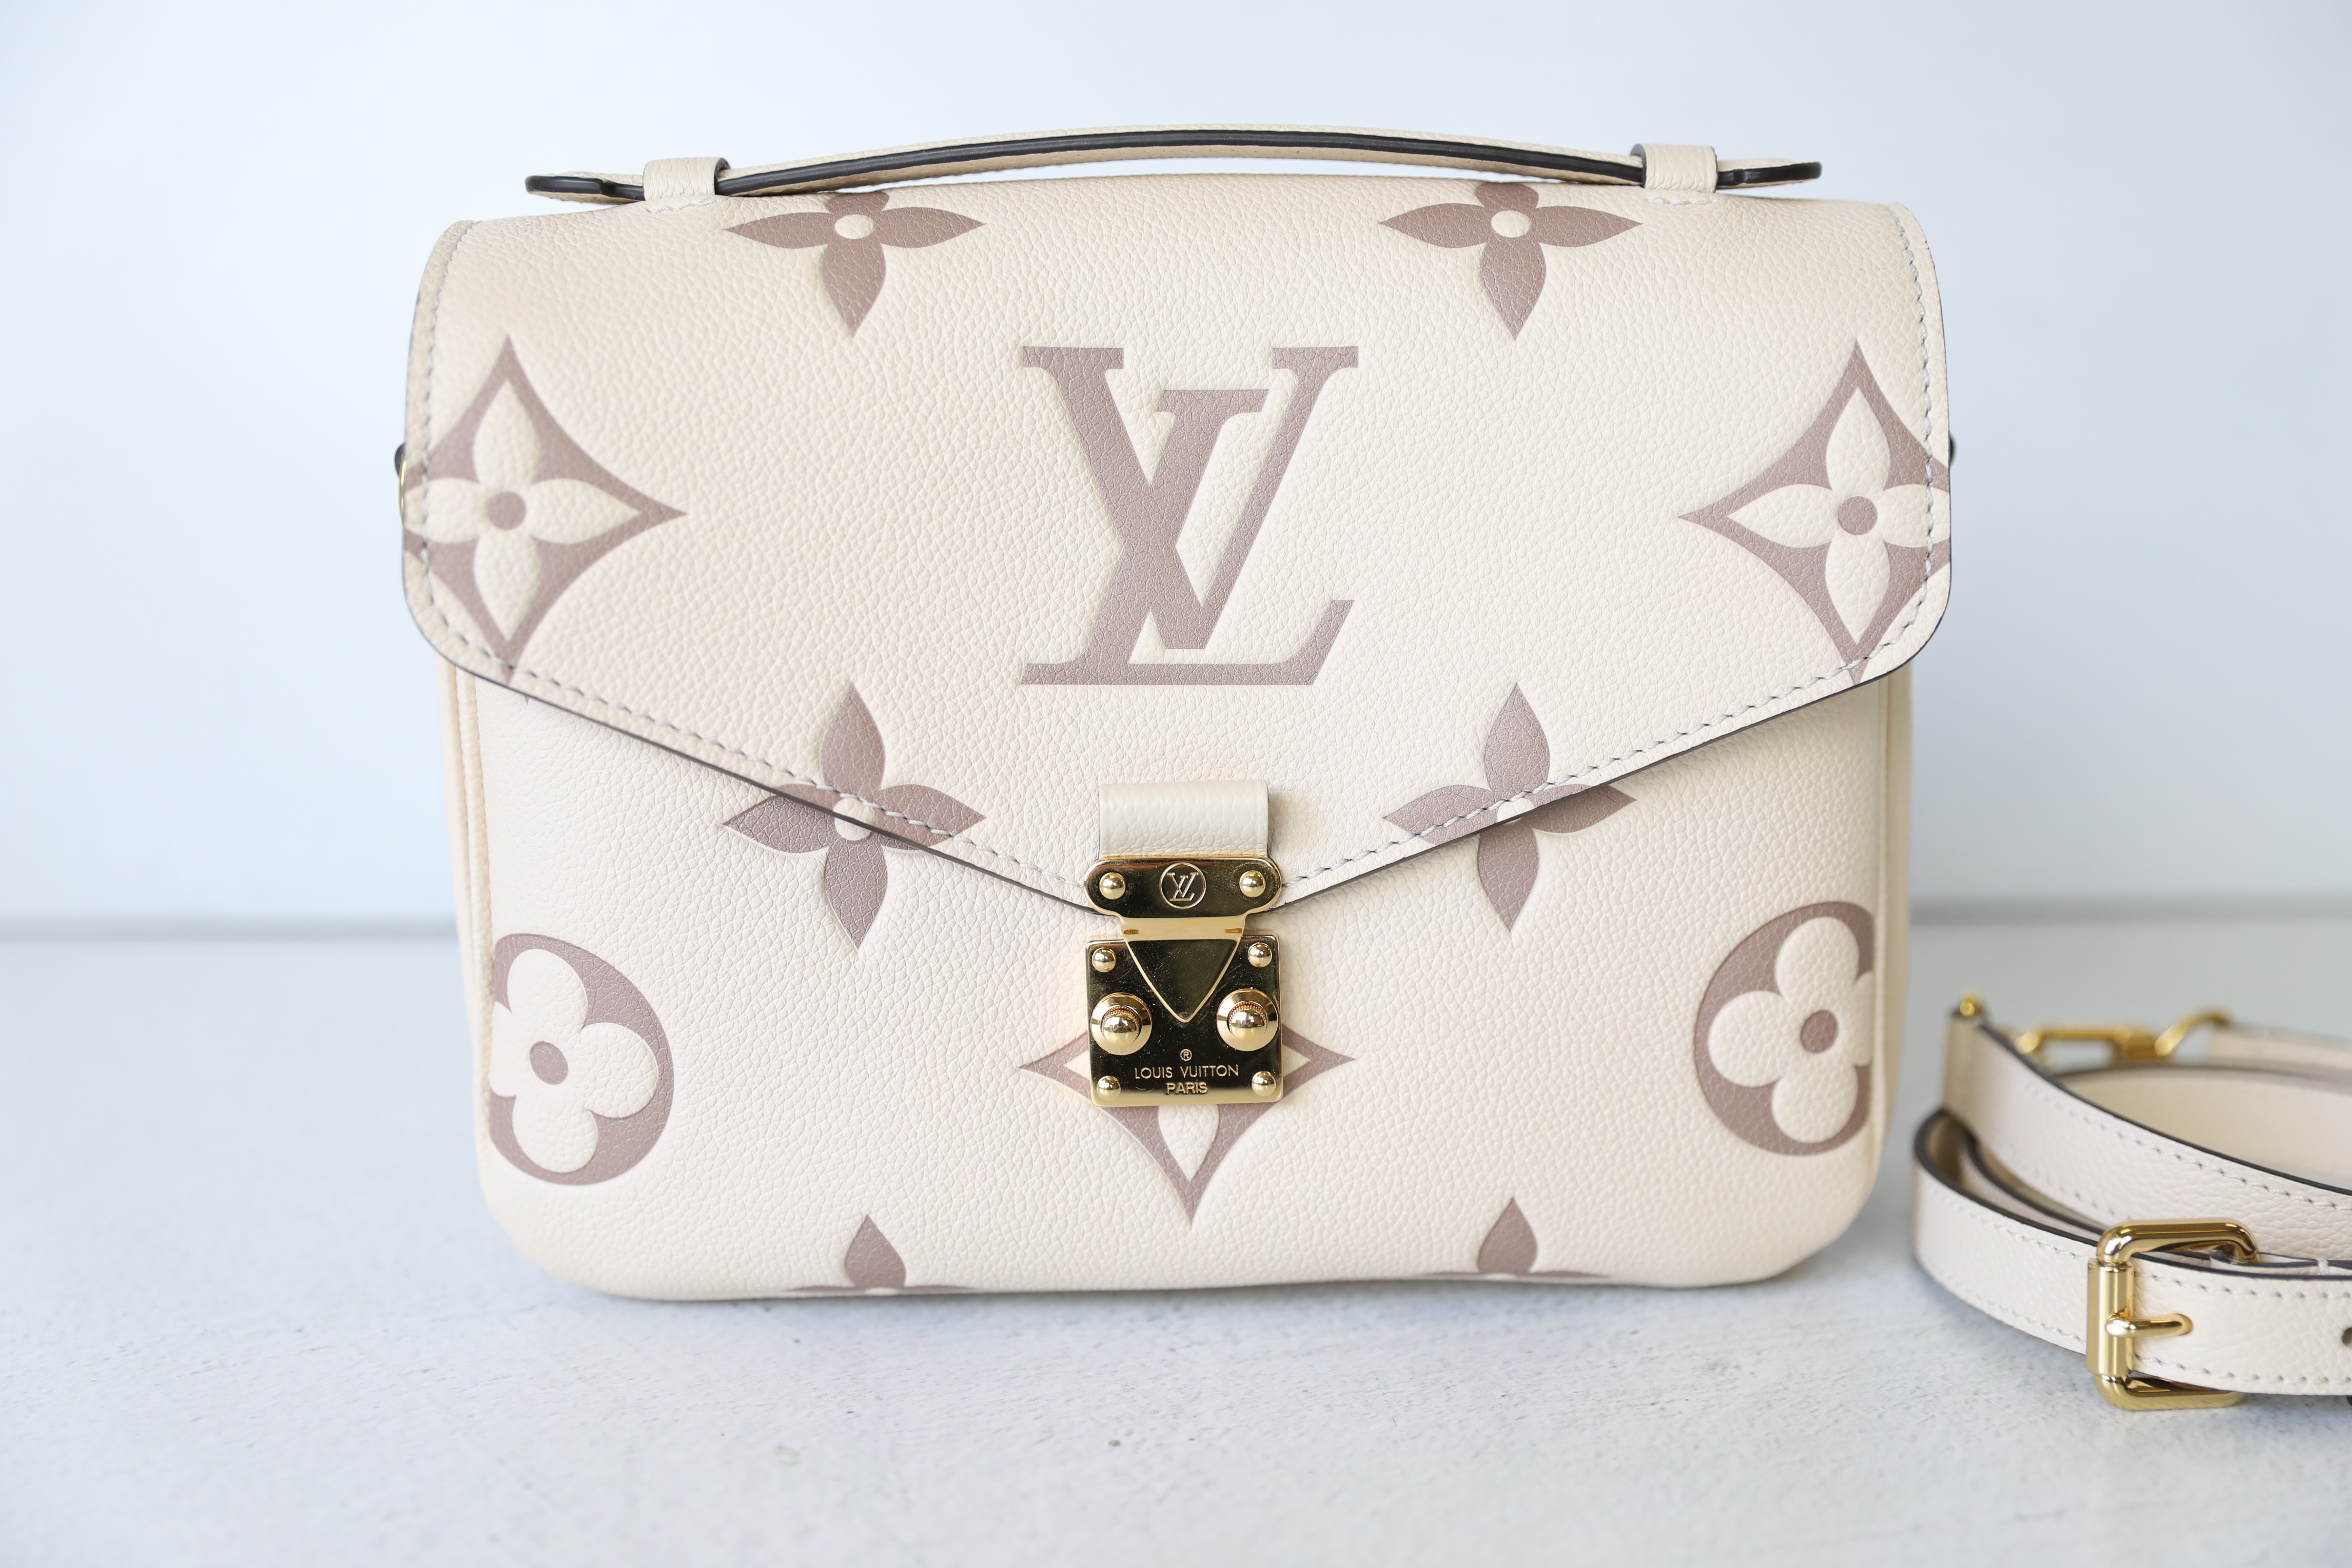 Louis Vuitton Pochette Metis, Black And Beige Leather With Gold Hardware,  Preowned In Box Wa001